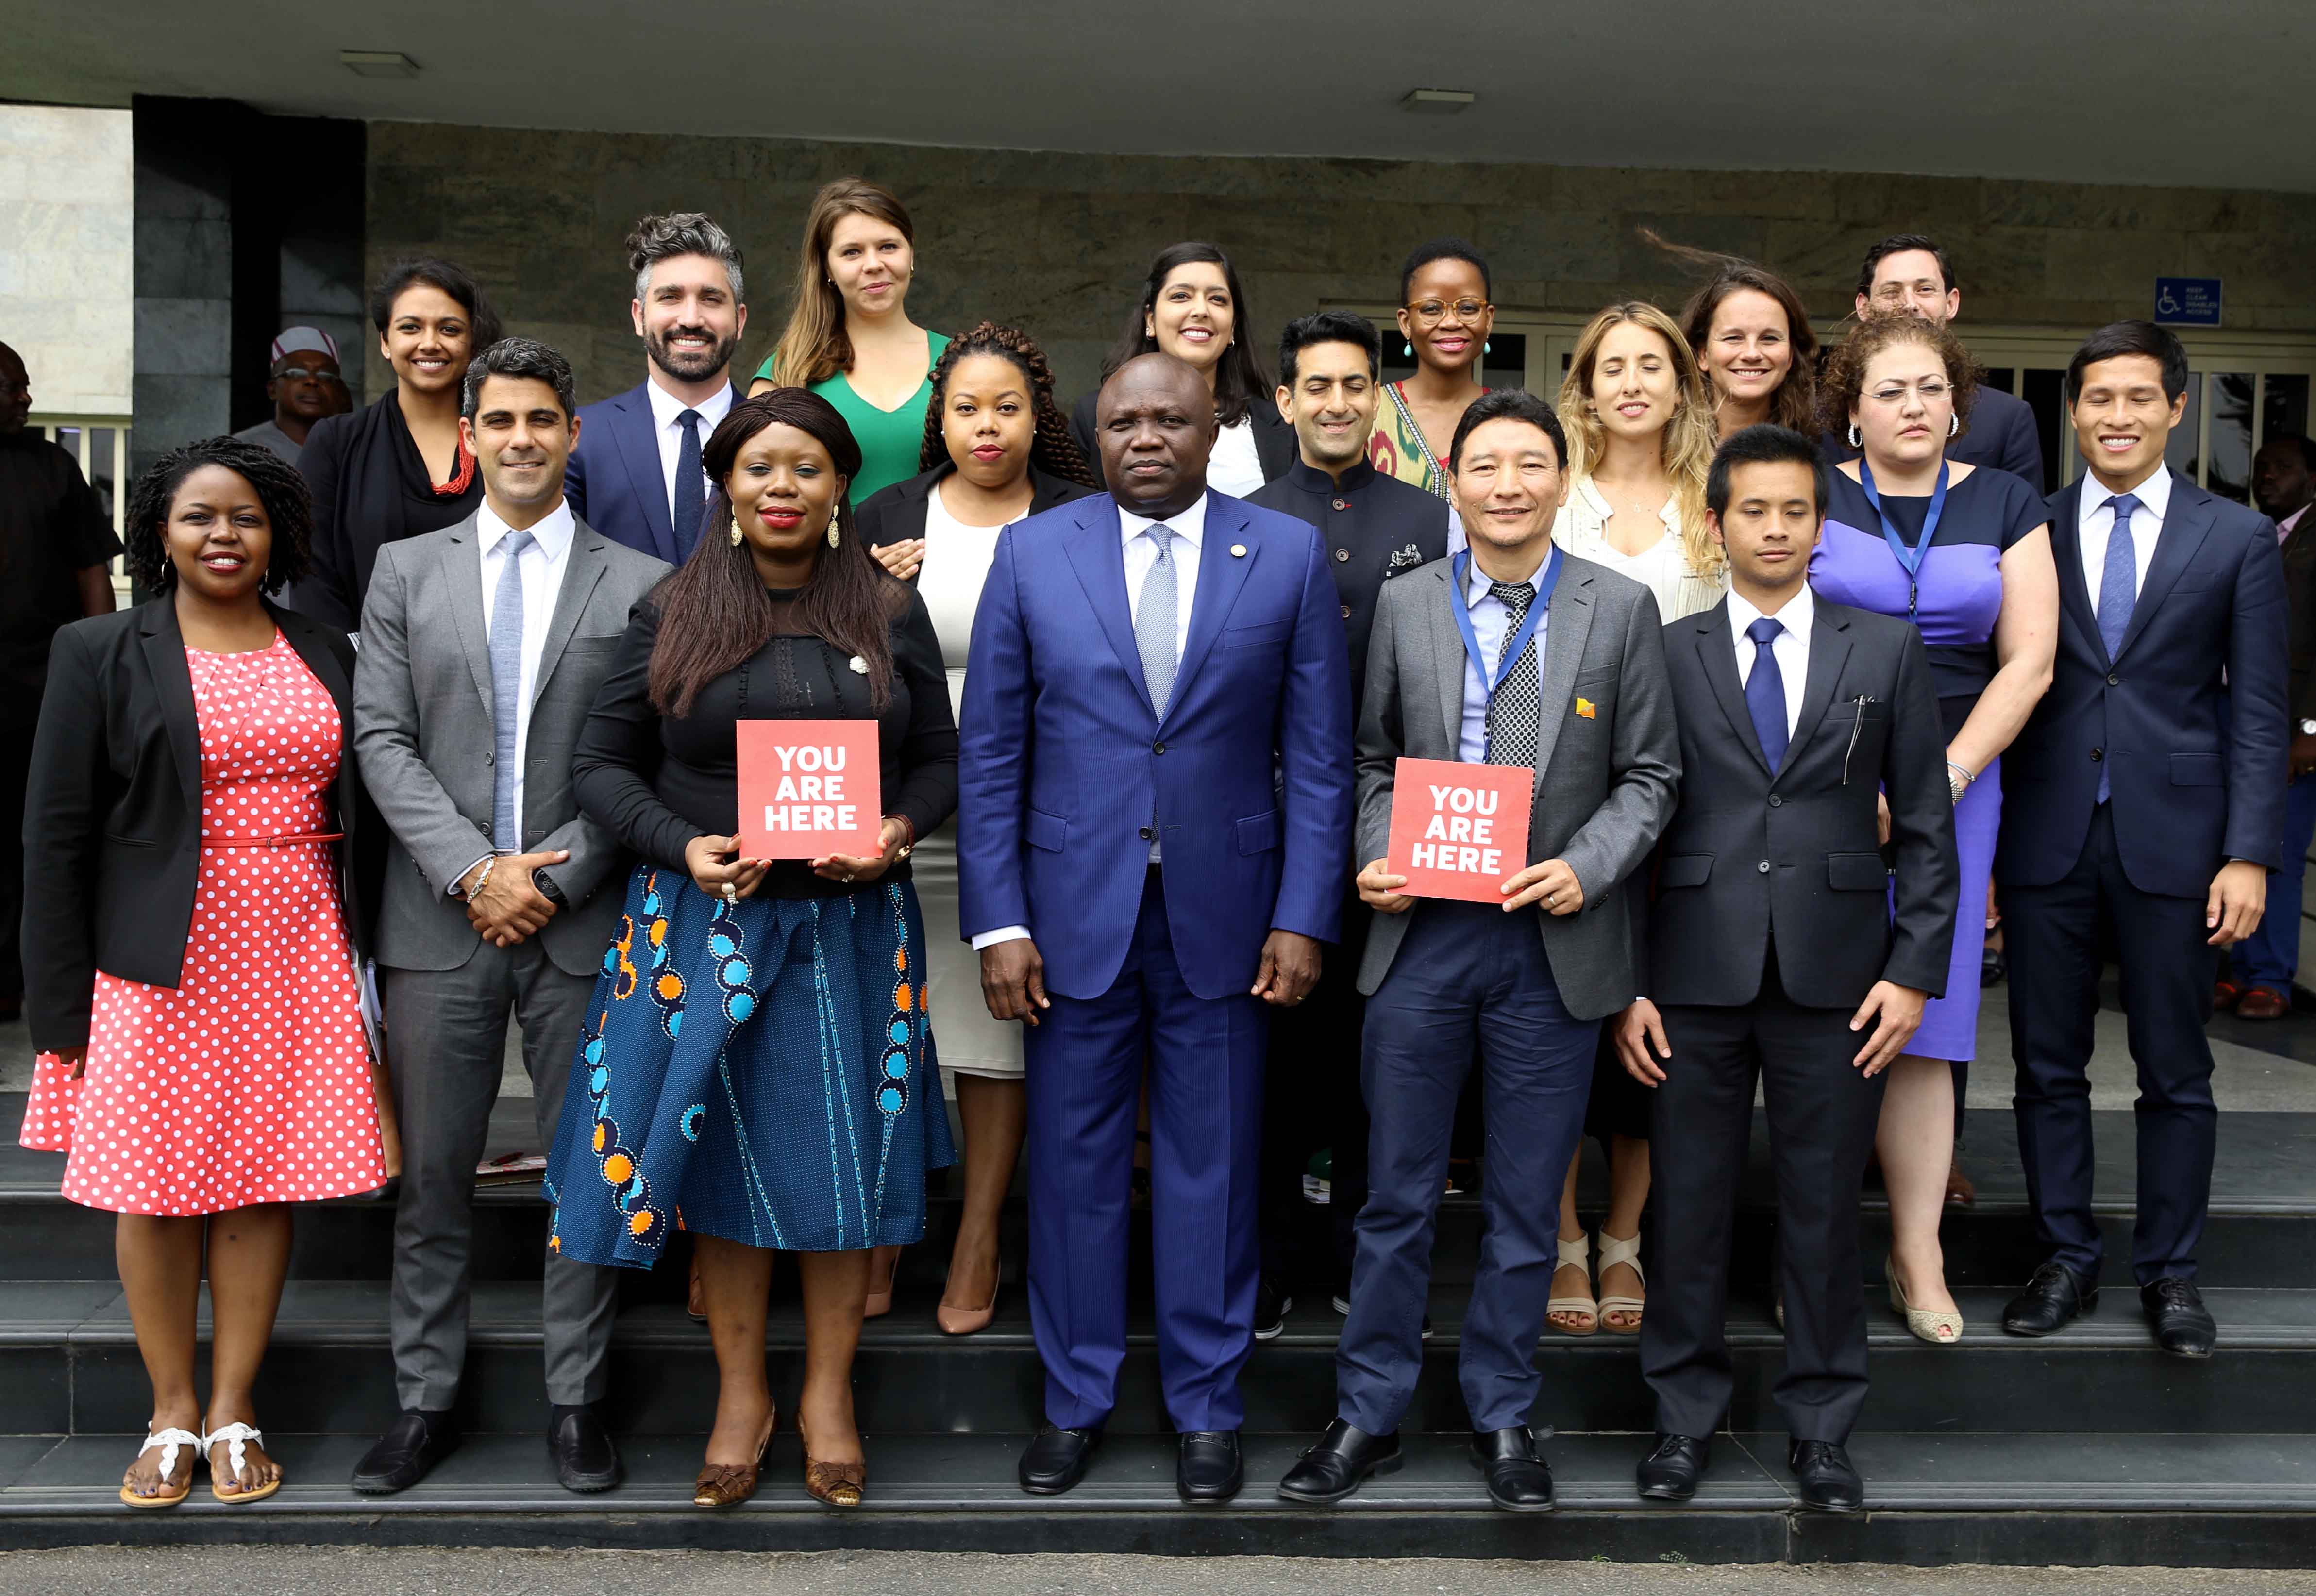  Lagos State Governor, Mr. Akinwunmi Ambode (3rd right), with Immediate Past Vice President, International Affairs, Harvard Kennedy School, Toyosi Akerele-Ogunsiji (3rd left); Allen Asiimire (left); King Tshering (2nd right) and other students of Harvard Kennedy School of Government during their courtesy visit to the Governor at Lagos House, Ikeja, on Thursday, August 10, 2017. 